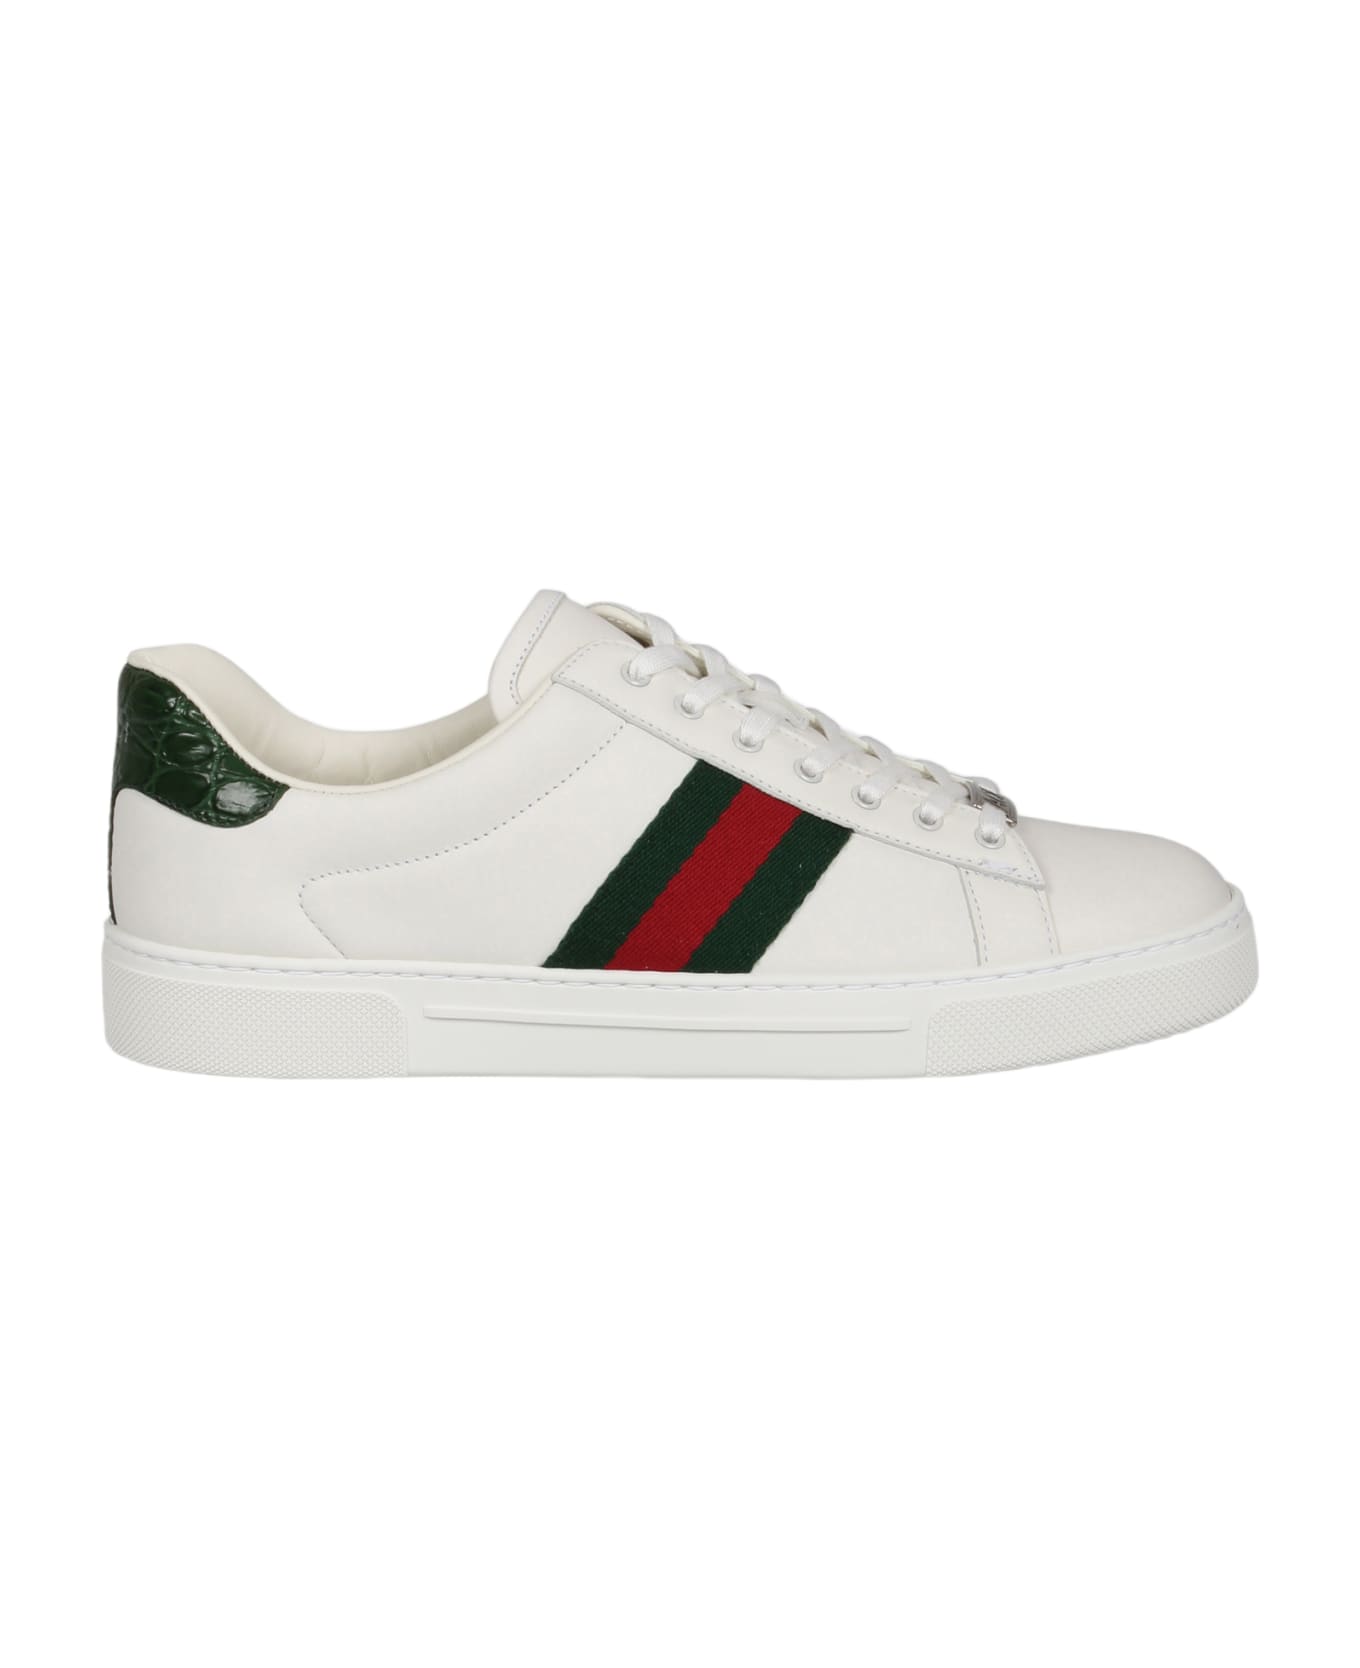 Gucci Ace Sneakers - White スニーカー